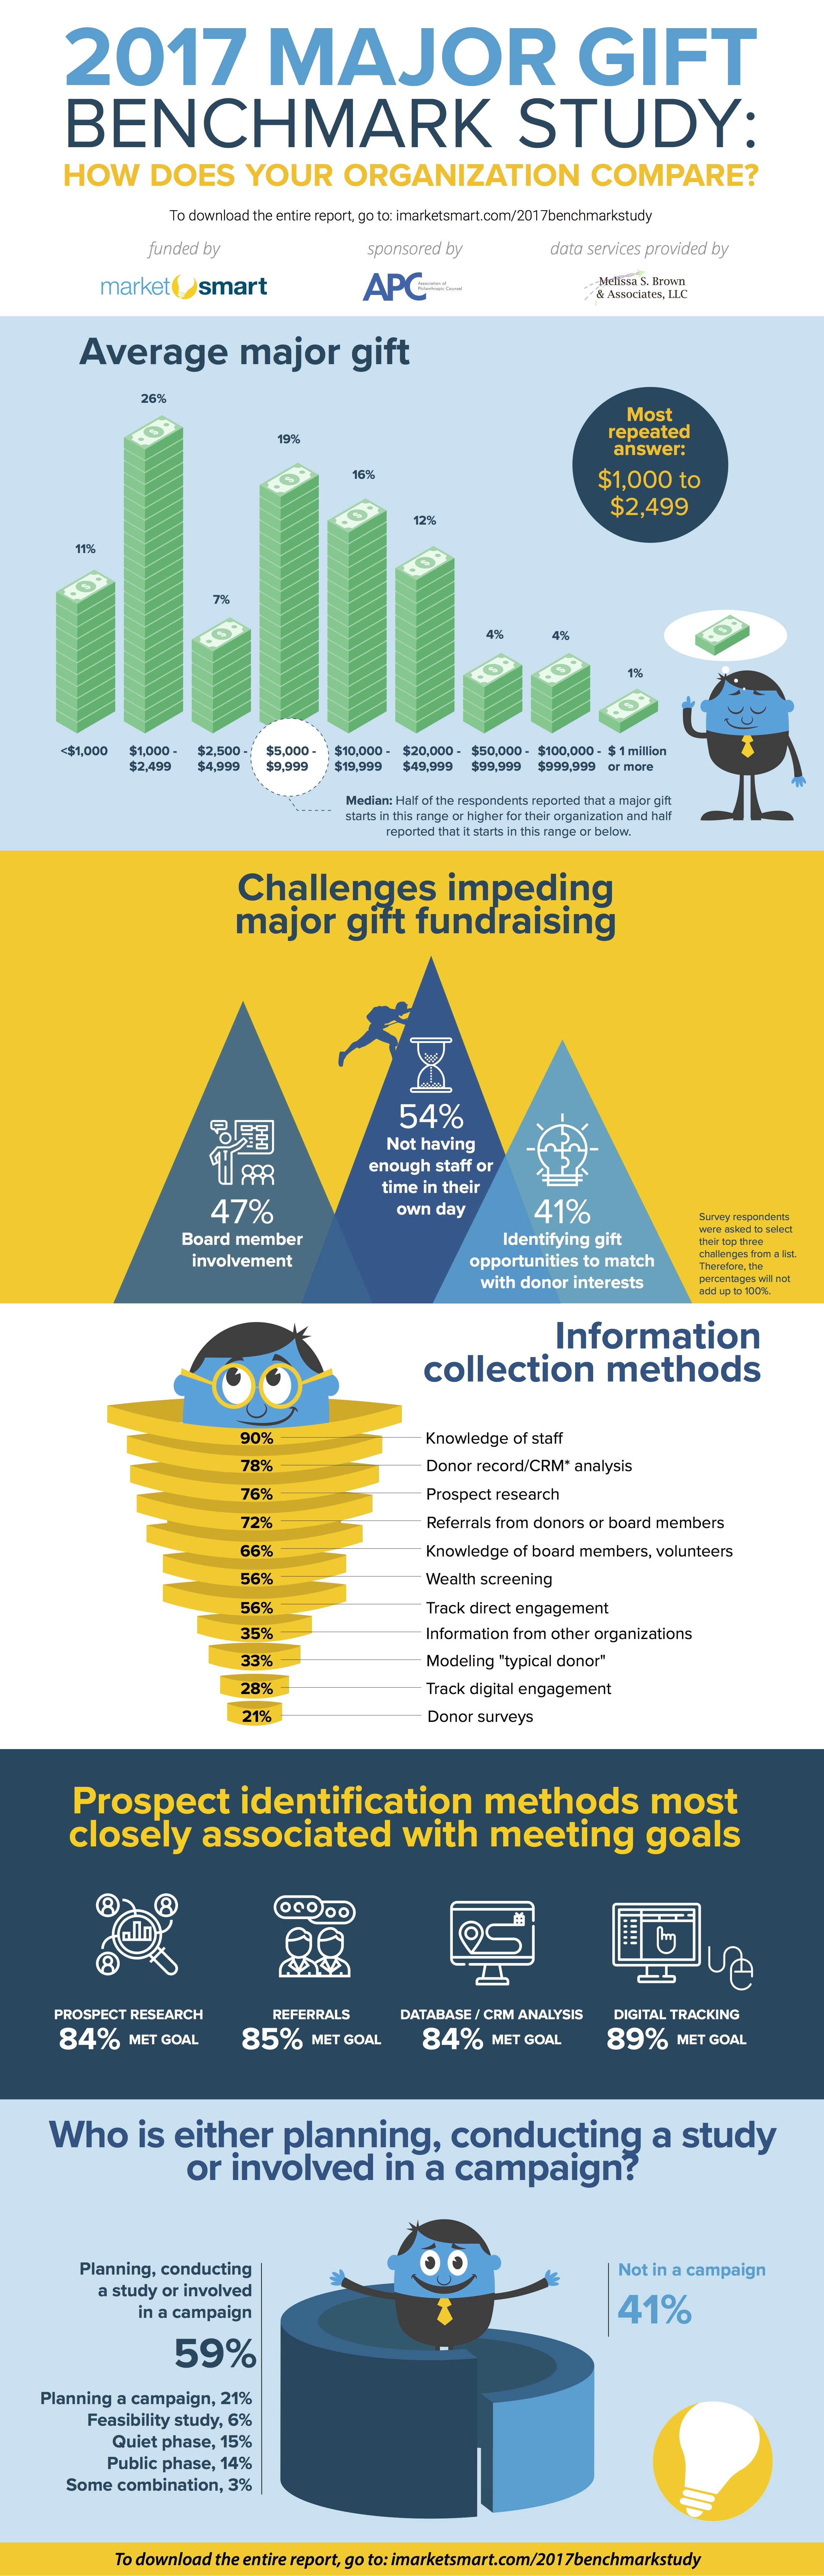 major gifts benchmark study infographic